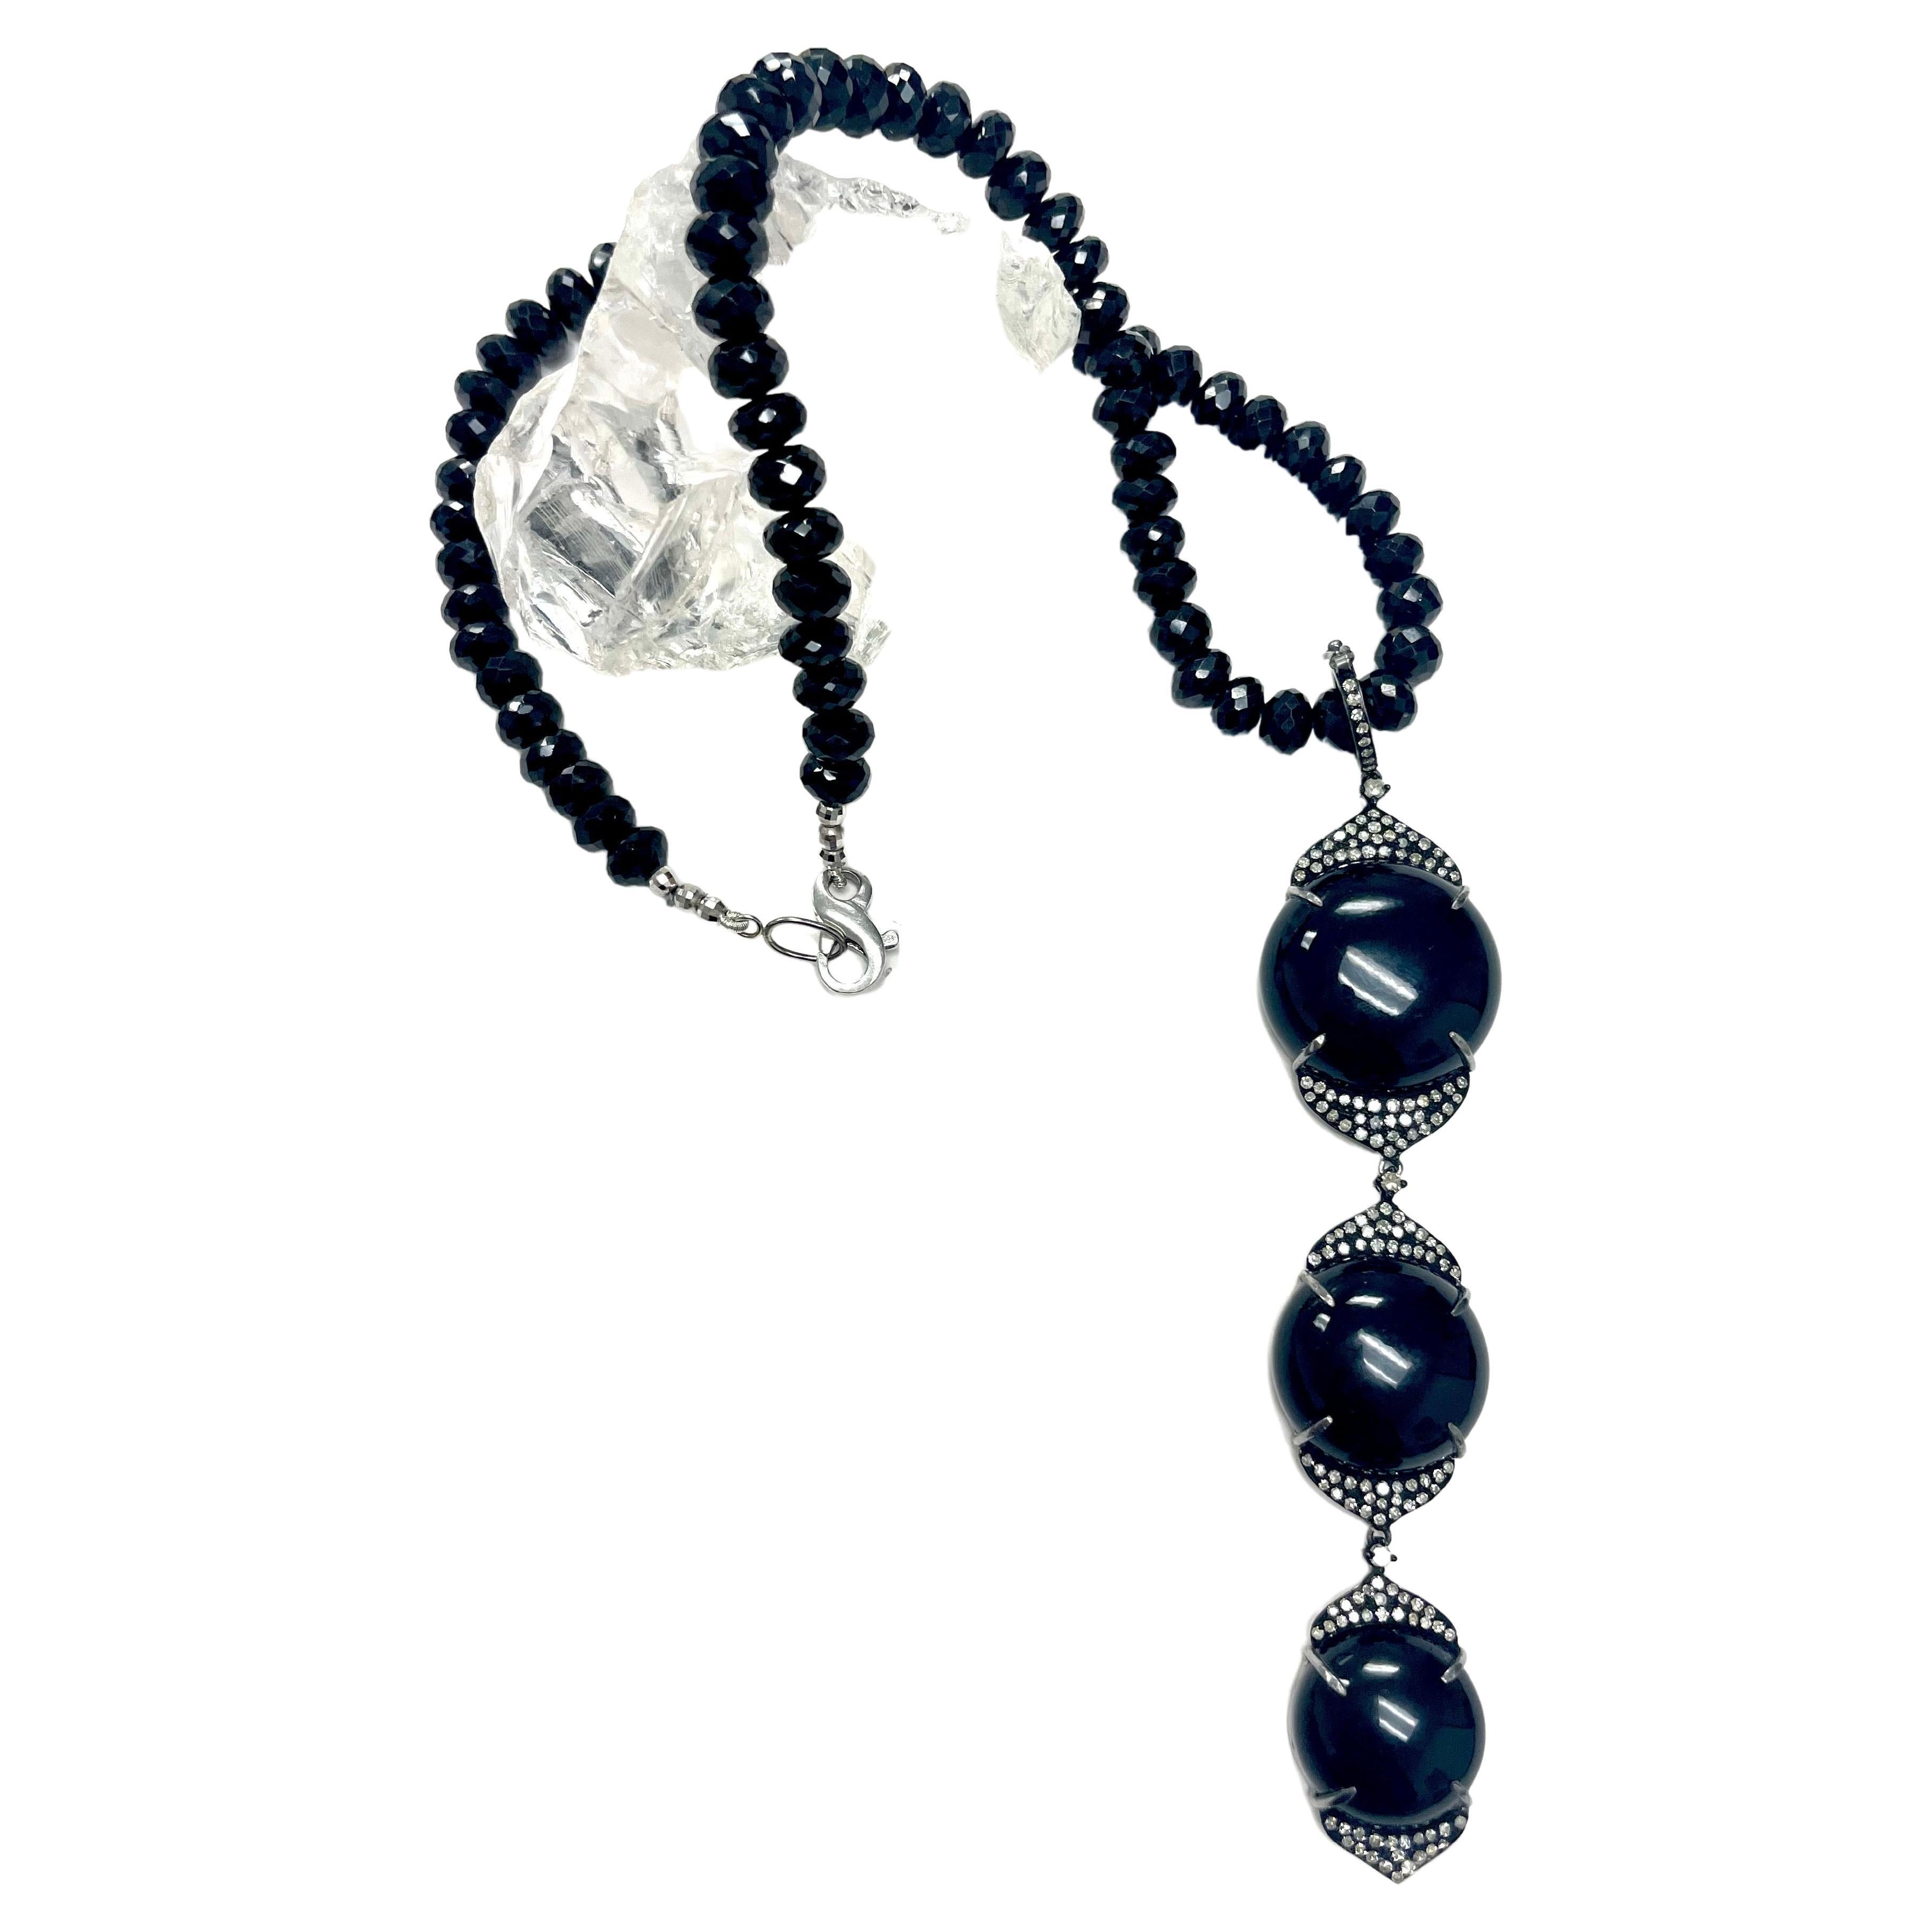 Bead Black 3 Drop Onyx Pendant with Diamonds and Spinel Necklace For Sale